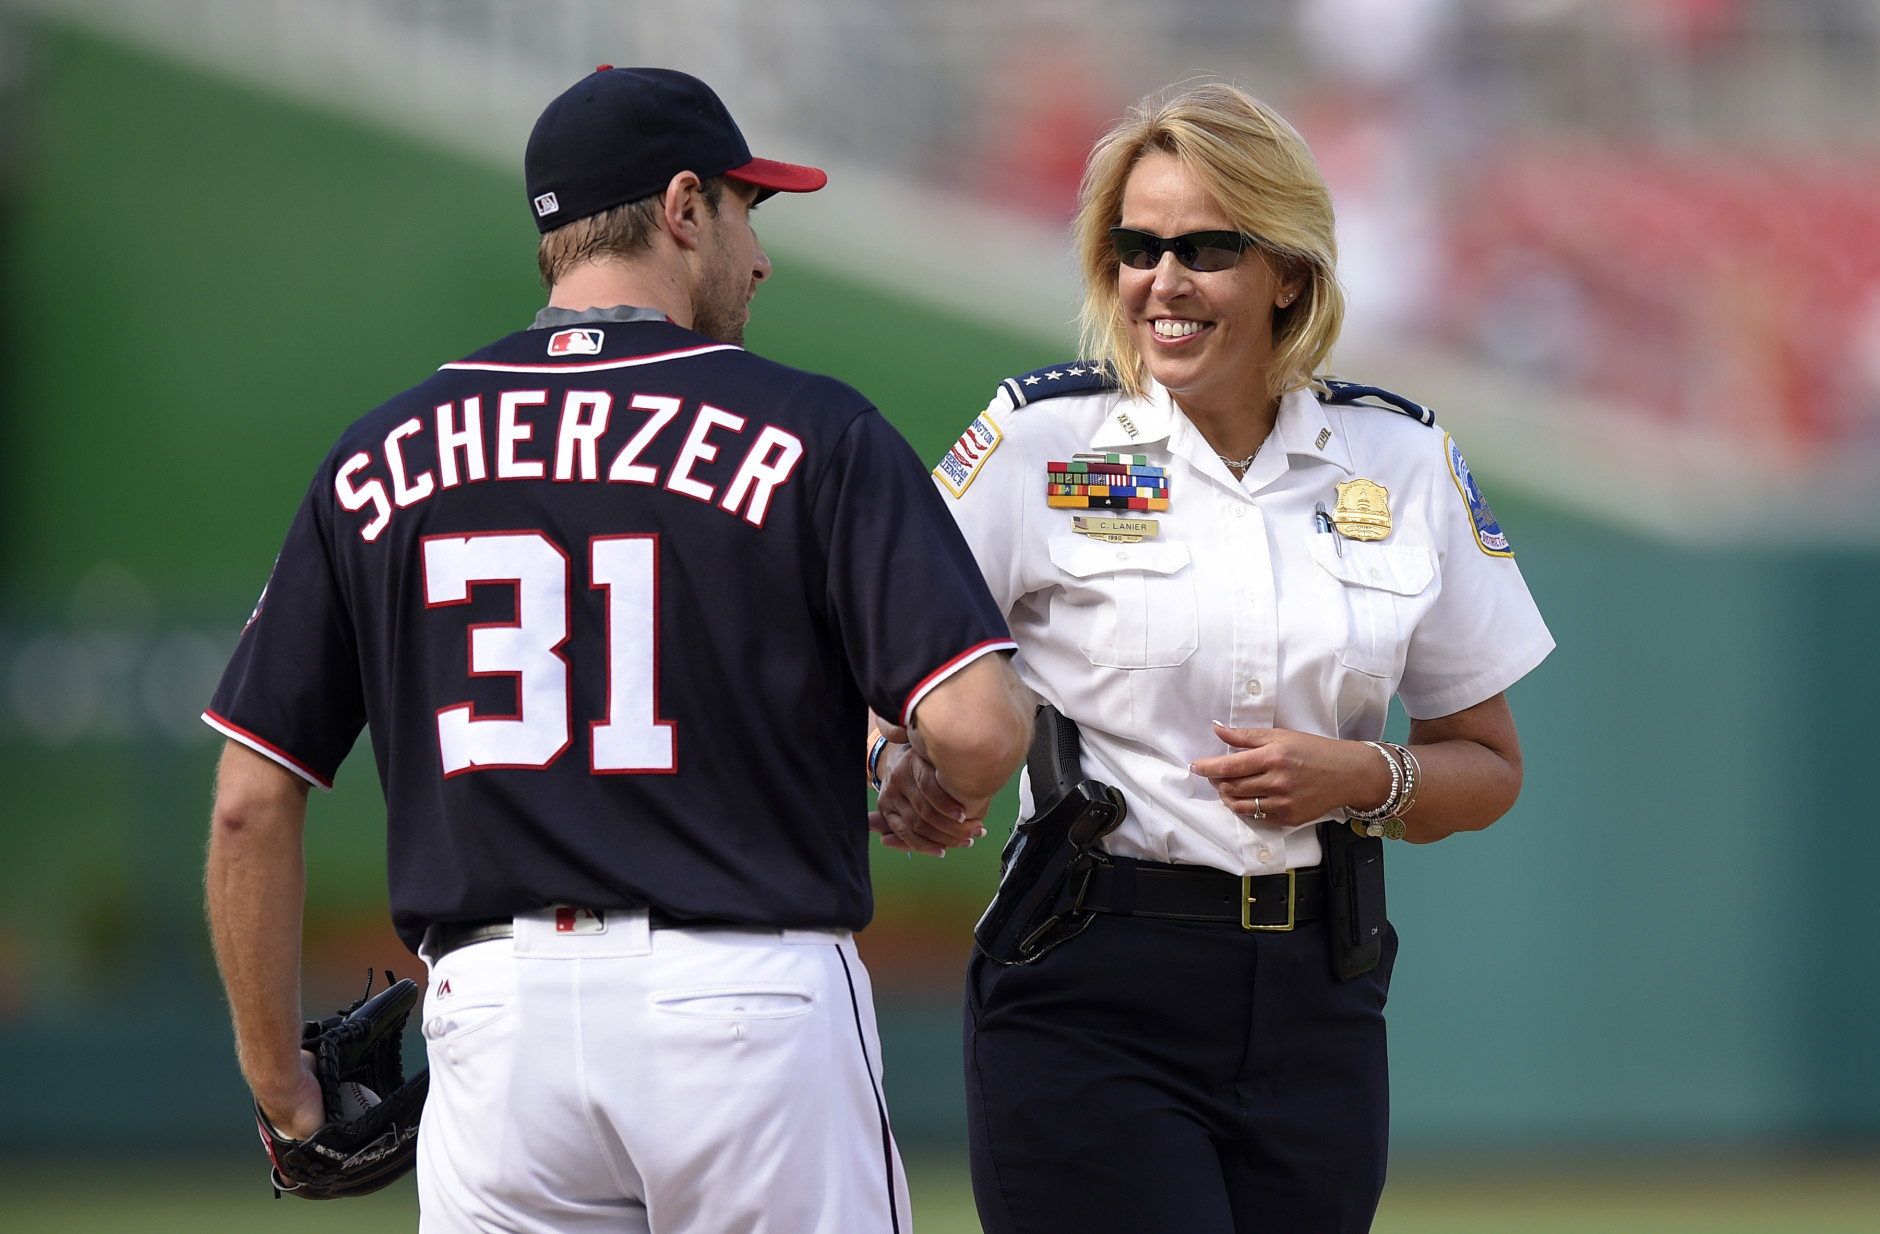 Metropolitan Police Department Chief Cathy Lanier, right, shakes hands with Washington Nationals starting pitcher Max Scherzer (31) after she handed him the game ball before the Nationals' baseball game against the Atlanta Braves, Monday, Sept. 5, 2016, in Washington. (AP Photo/Nick Wass)